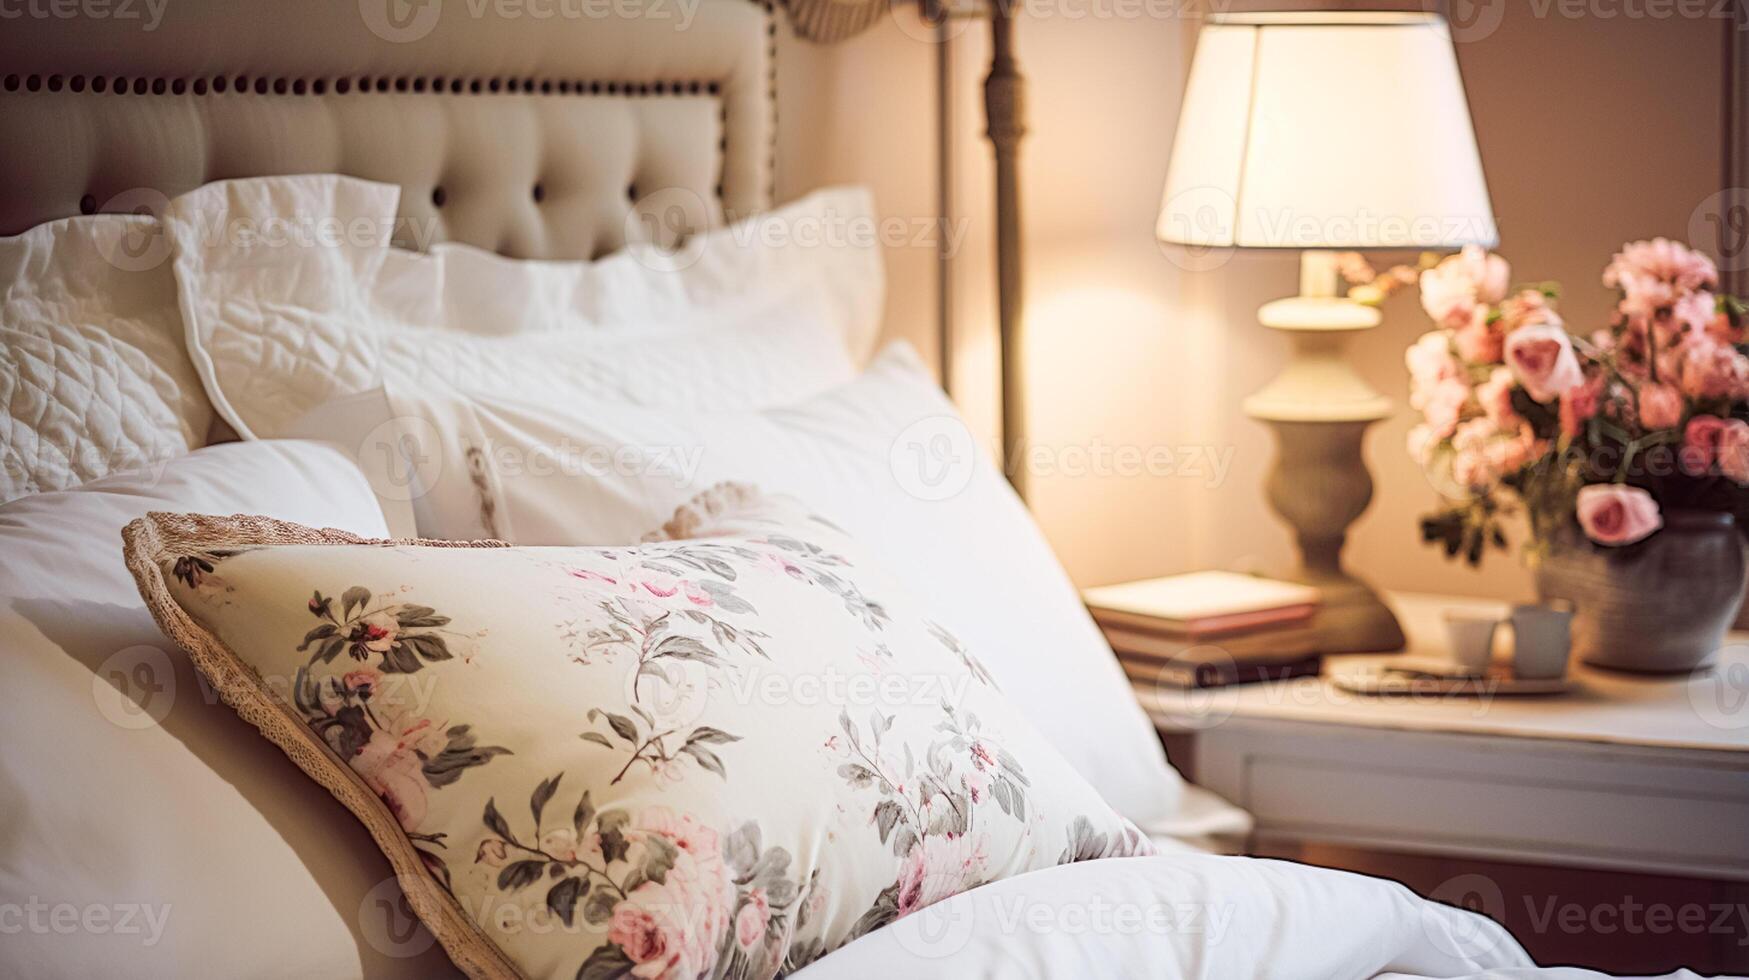 AI generated Bedroom decor, modern cottage interior design and home decor, bed linen and elegant country bedding style, lamp and flowers, English countryside house or holiday rental photo